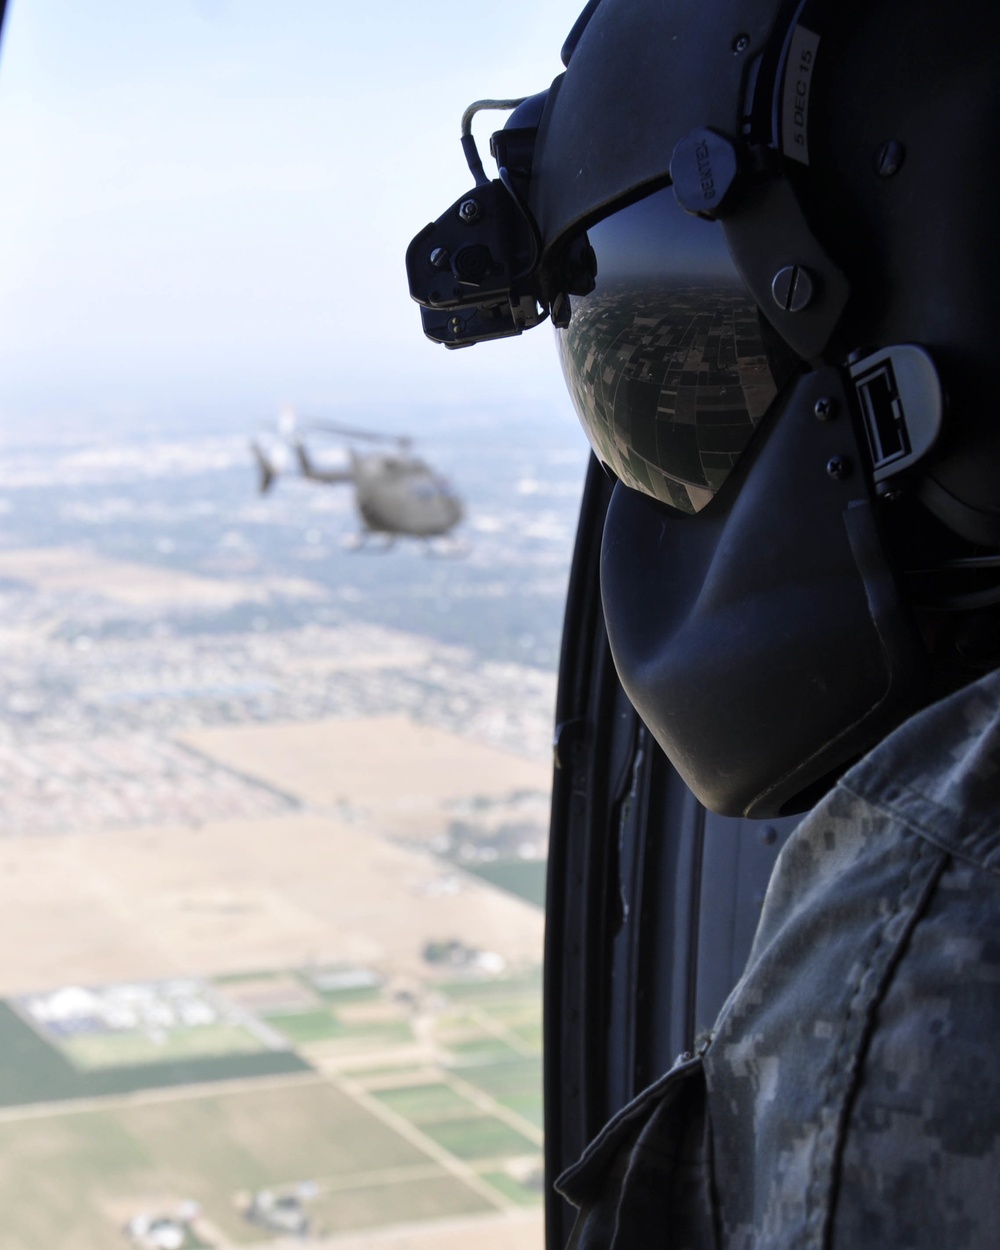 Spc. Kevin Bowers, crew chief with A Company, 2916th Aviation Battalion with U.S. Army National Training Center Fort Irwin, stationed at Barstow-Daggett Airport, watches out the window of a Black Hawk helicopter as they escort a Lakota aircraft